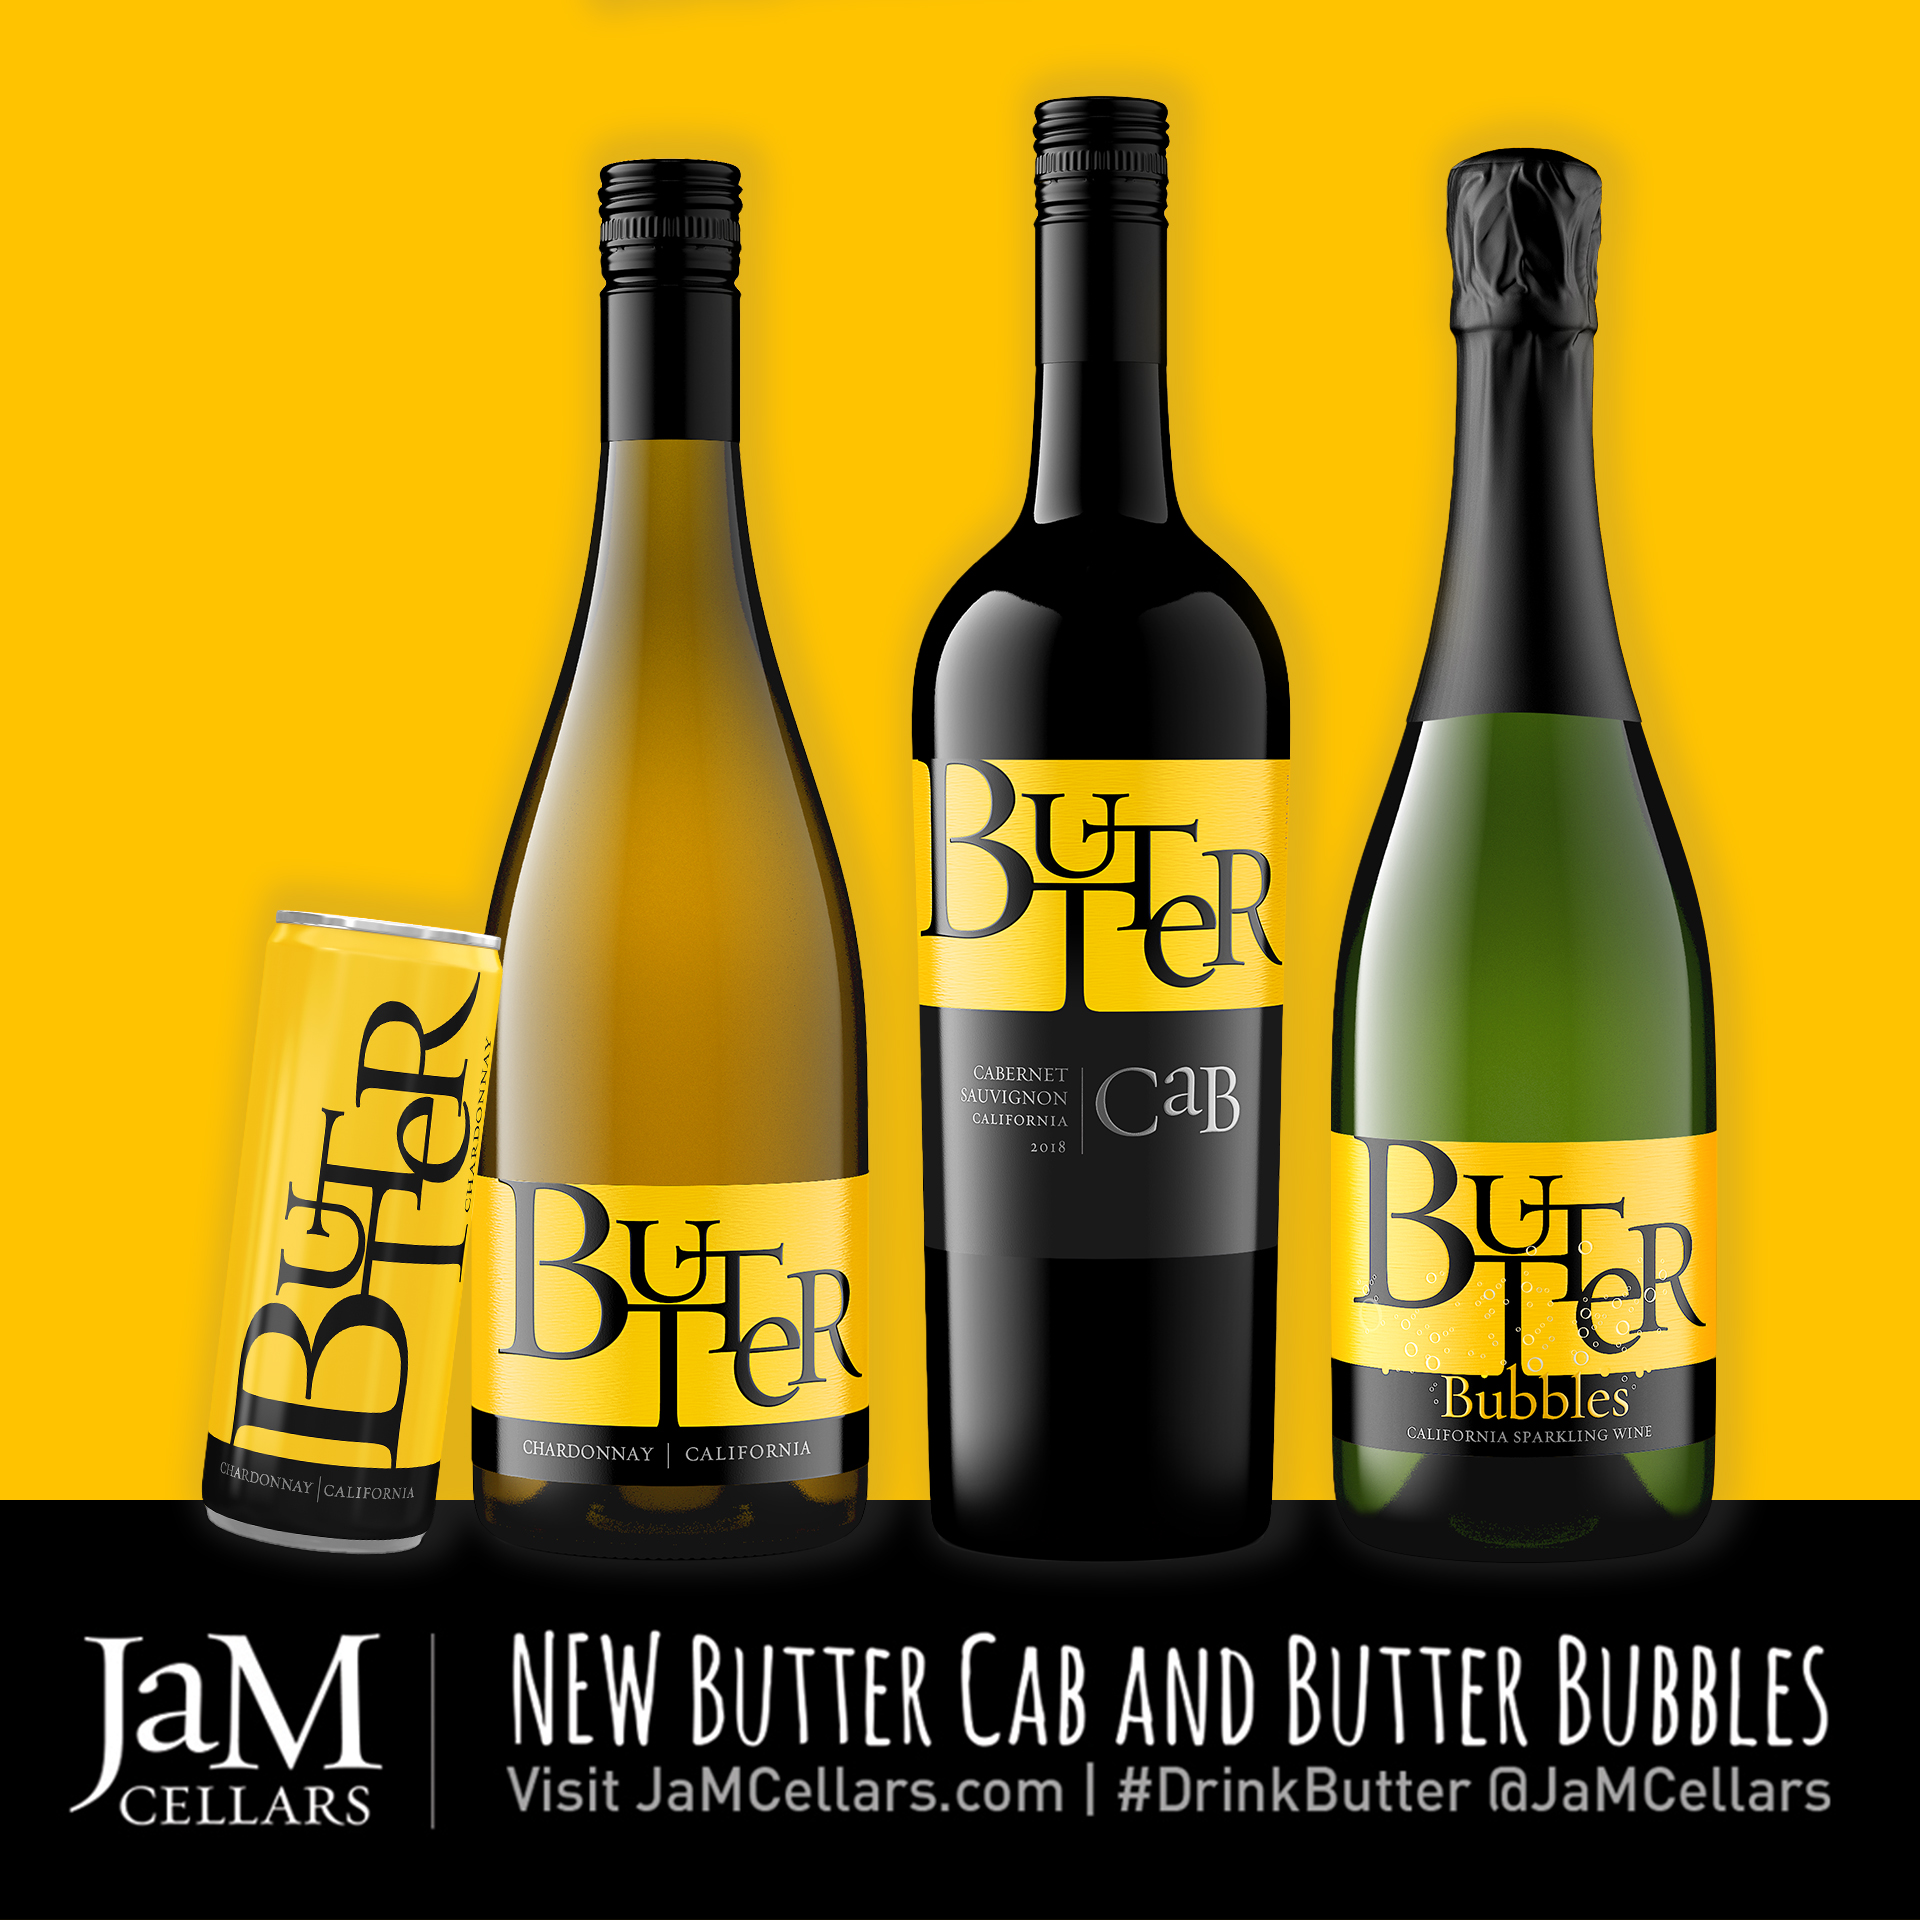 JaM Cellars Introduces Two New Wines Under the Butter Brand, Butter Cab and Butter Bubbles